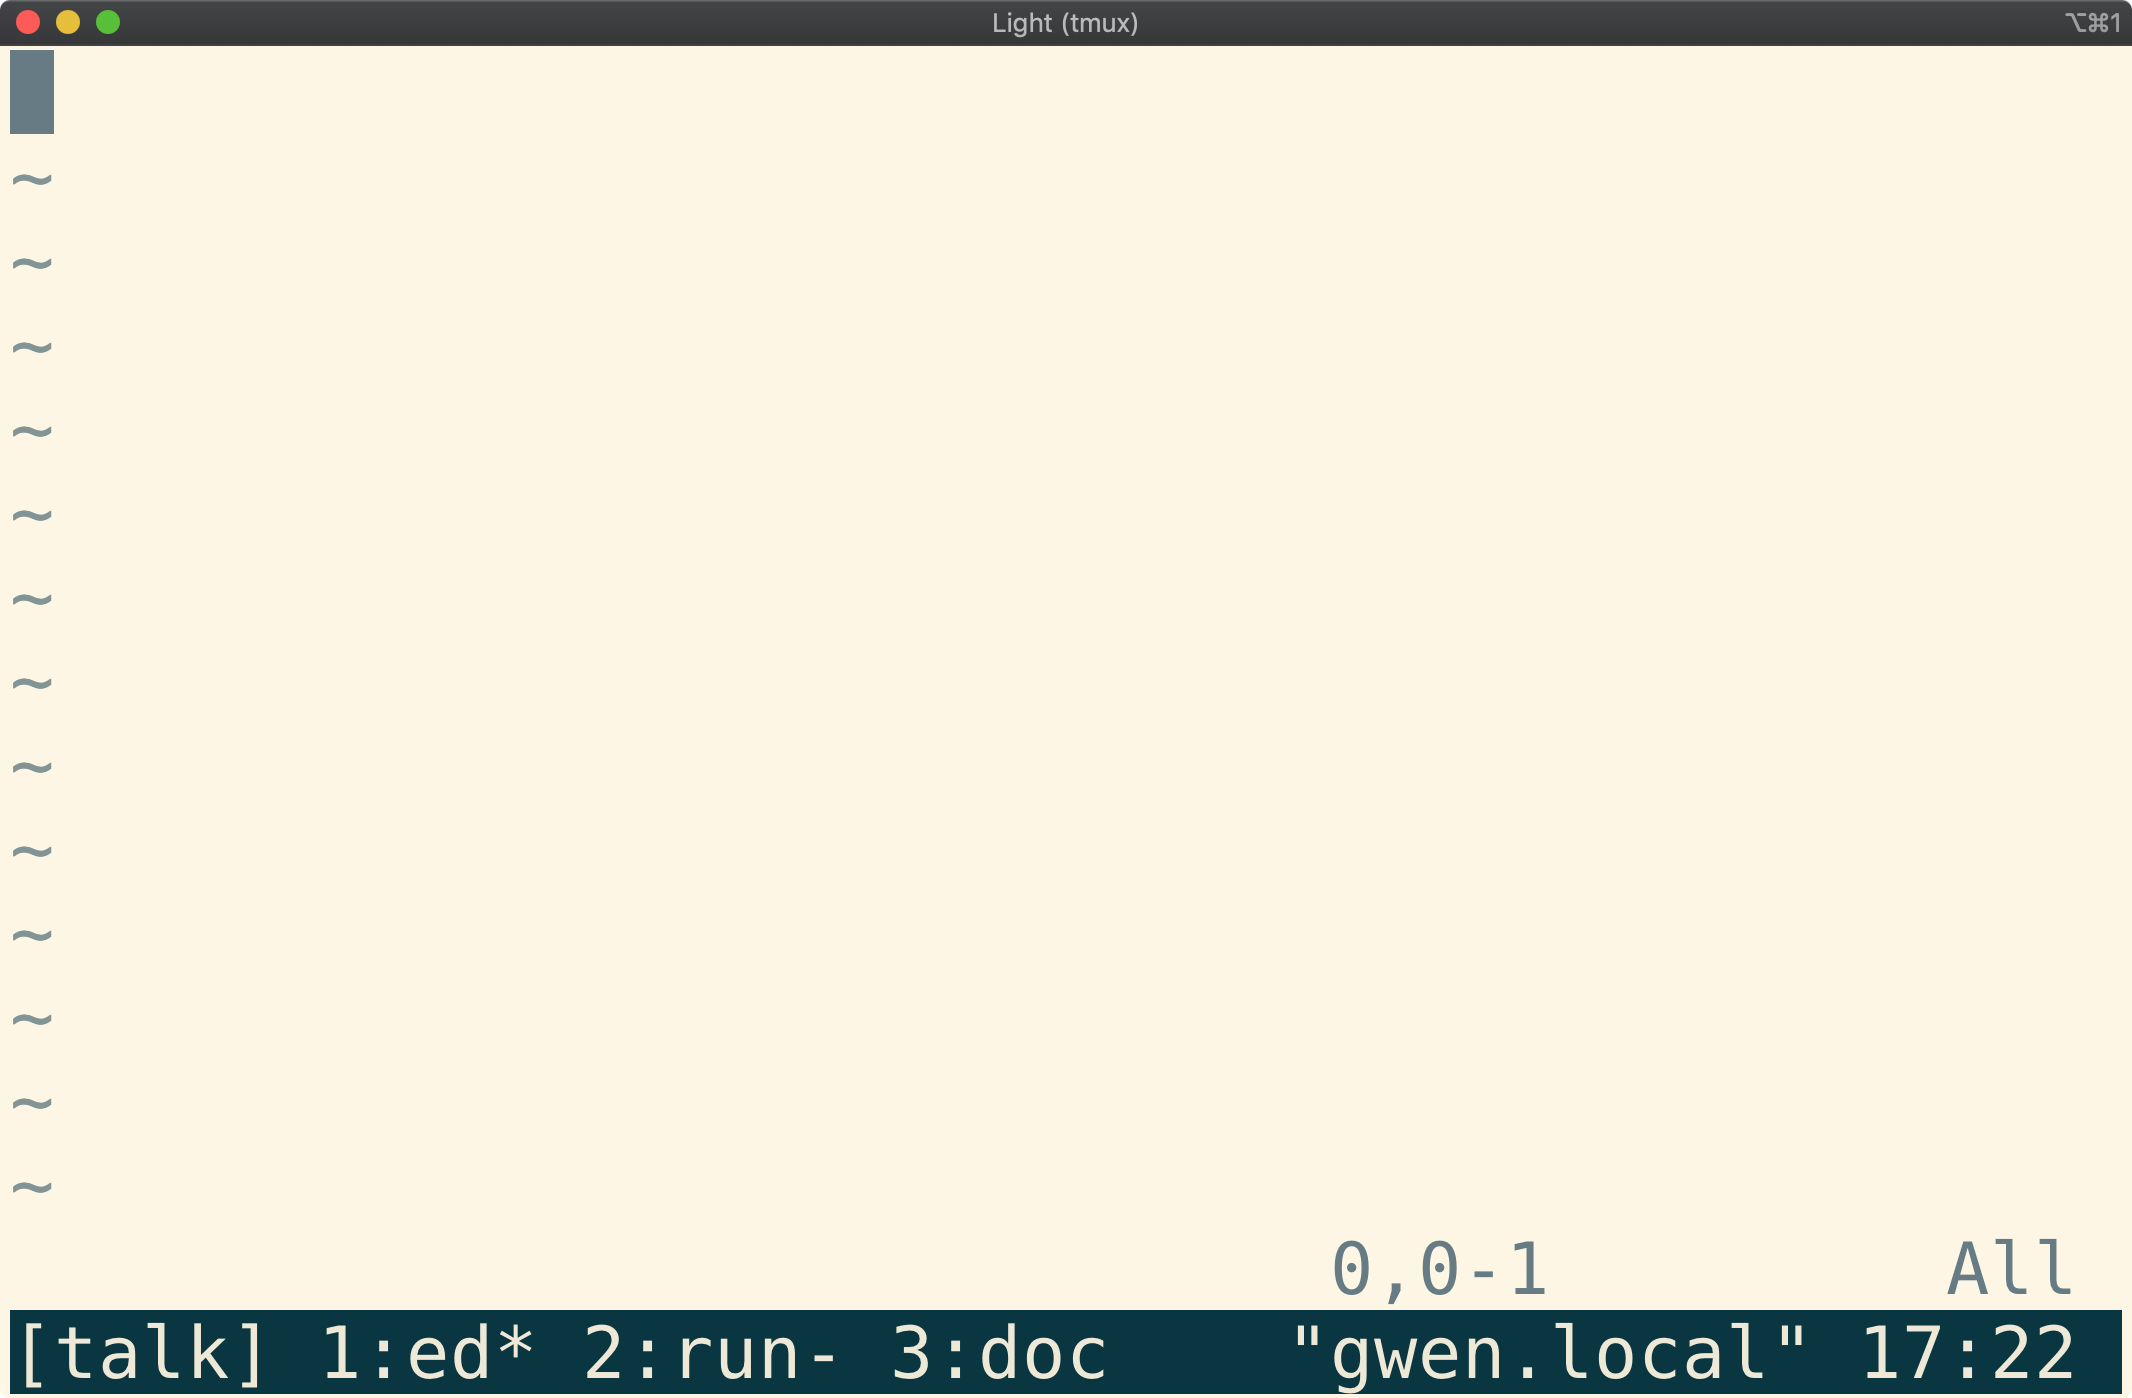 Tmux window showing windows named "edit", "test", and
"docs"